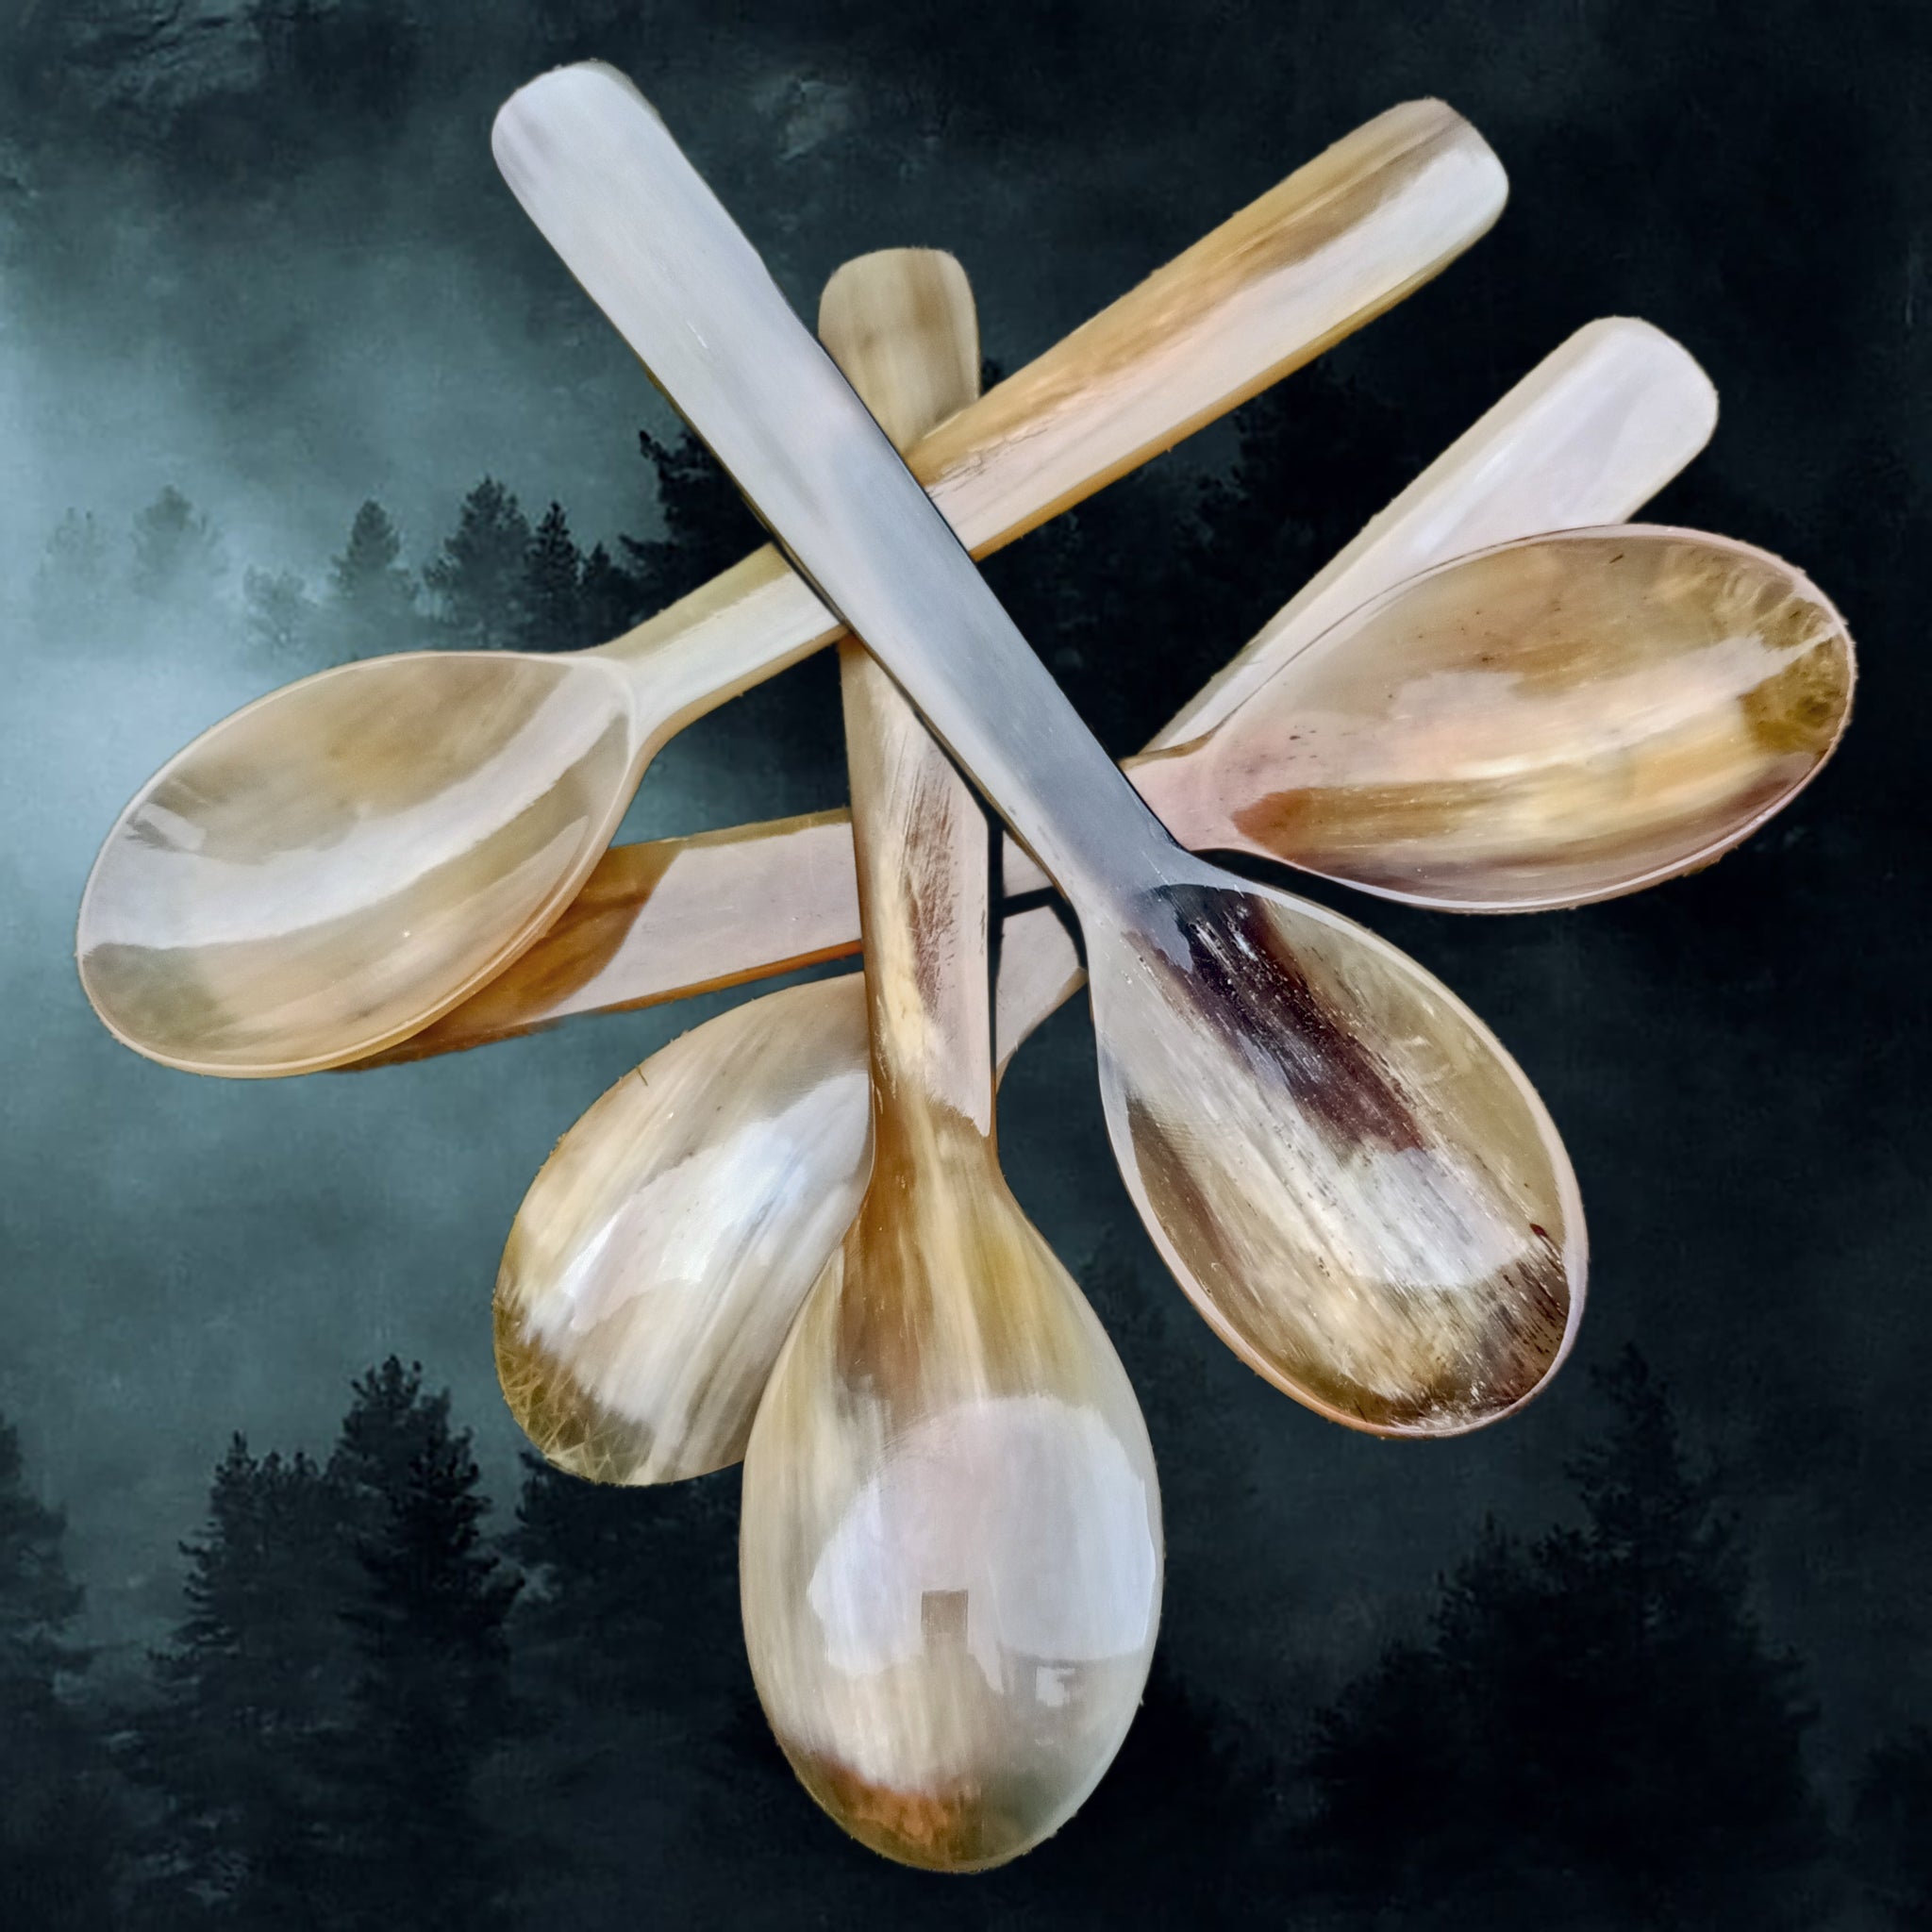 Large horn spoons for Viking / Medieval feasting